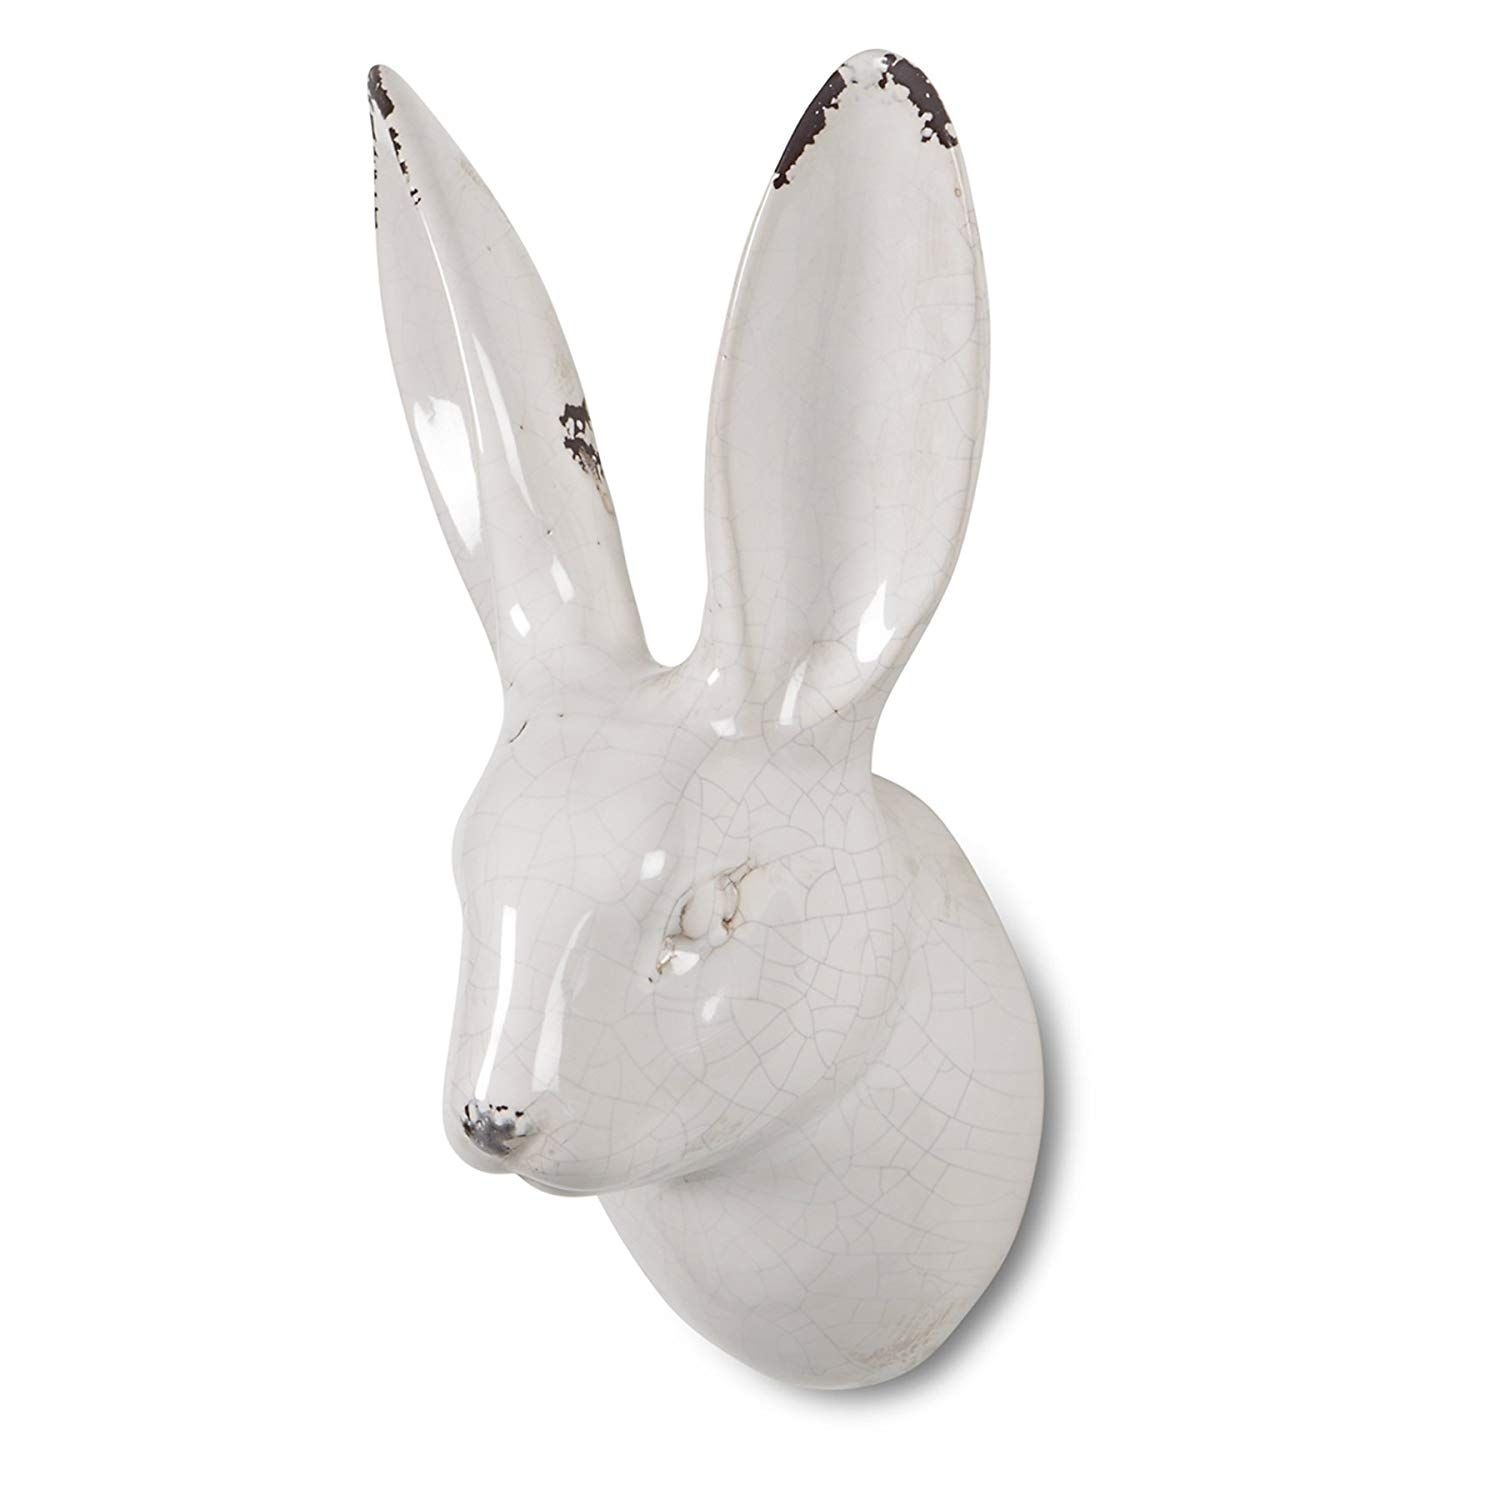 Amazon : Abbott Collection Bunny Head Wall Decor, White (large Within Bunny Wall Art (View 20 of 20)